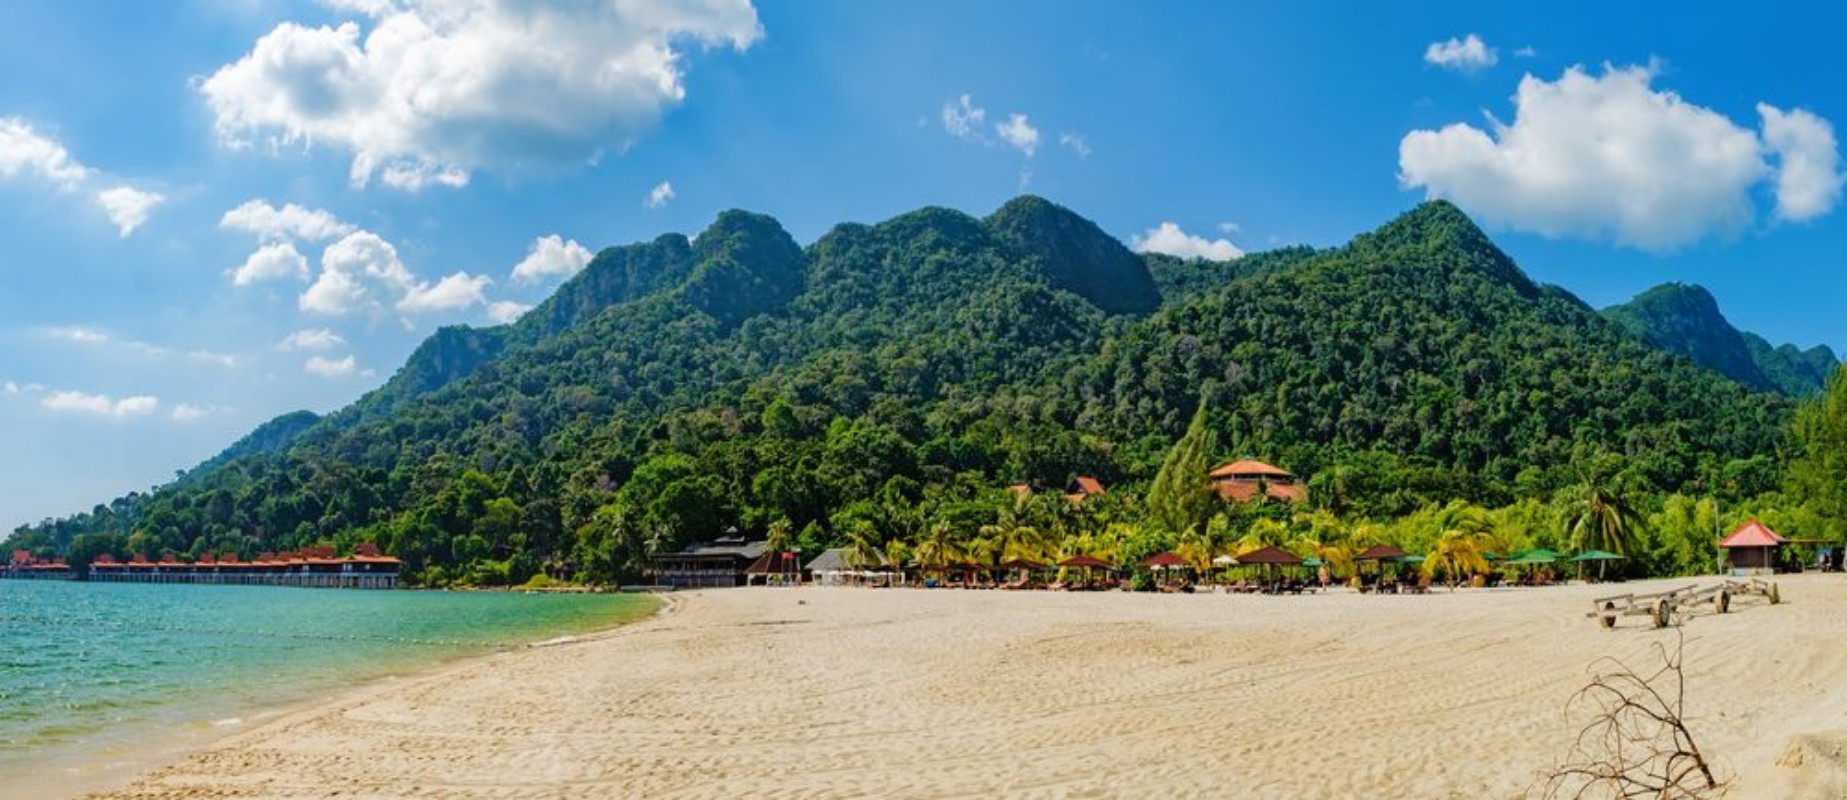 Afbeeldingen van Relaxing on remote paradise beach Tropical bungalow and luxury house on untouched sandy beach with palms trees in Langkawi Island Malaysia